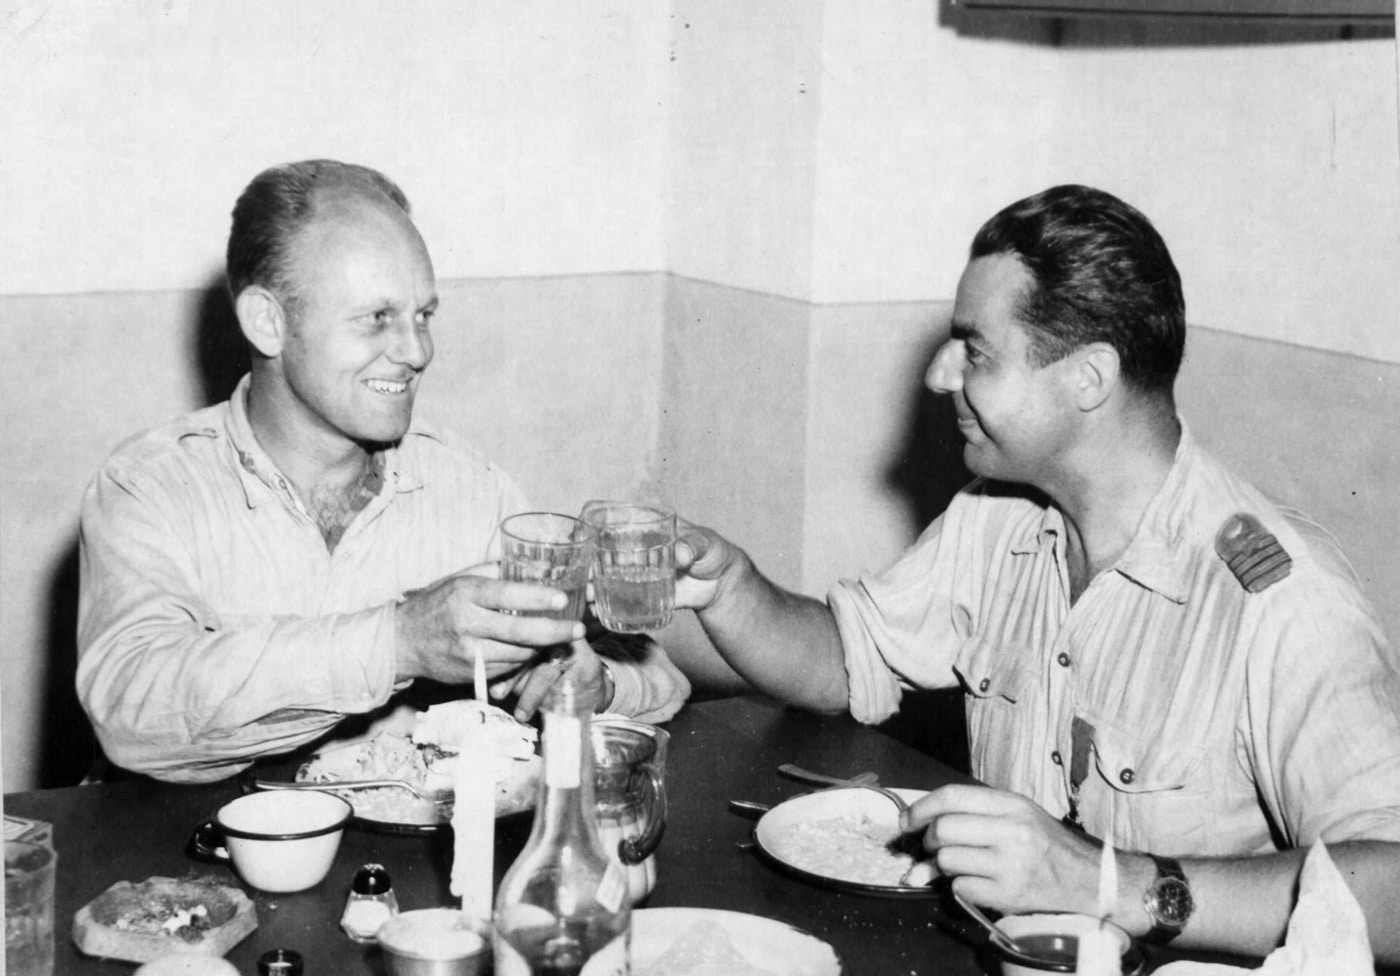 This is an image of Lt. Col. Gunn and Captain Cantacuzino celebrating their successful escape with a meal and a drink in Italy.